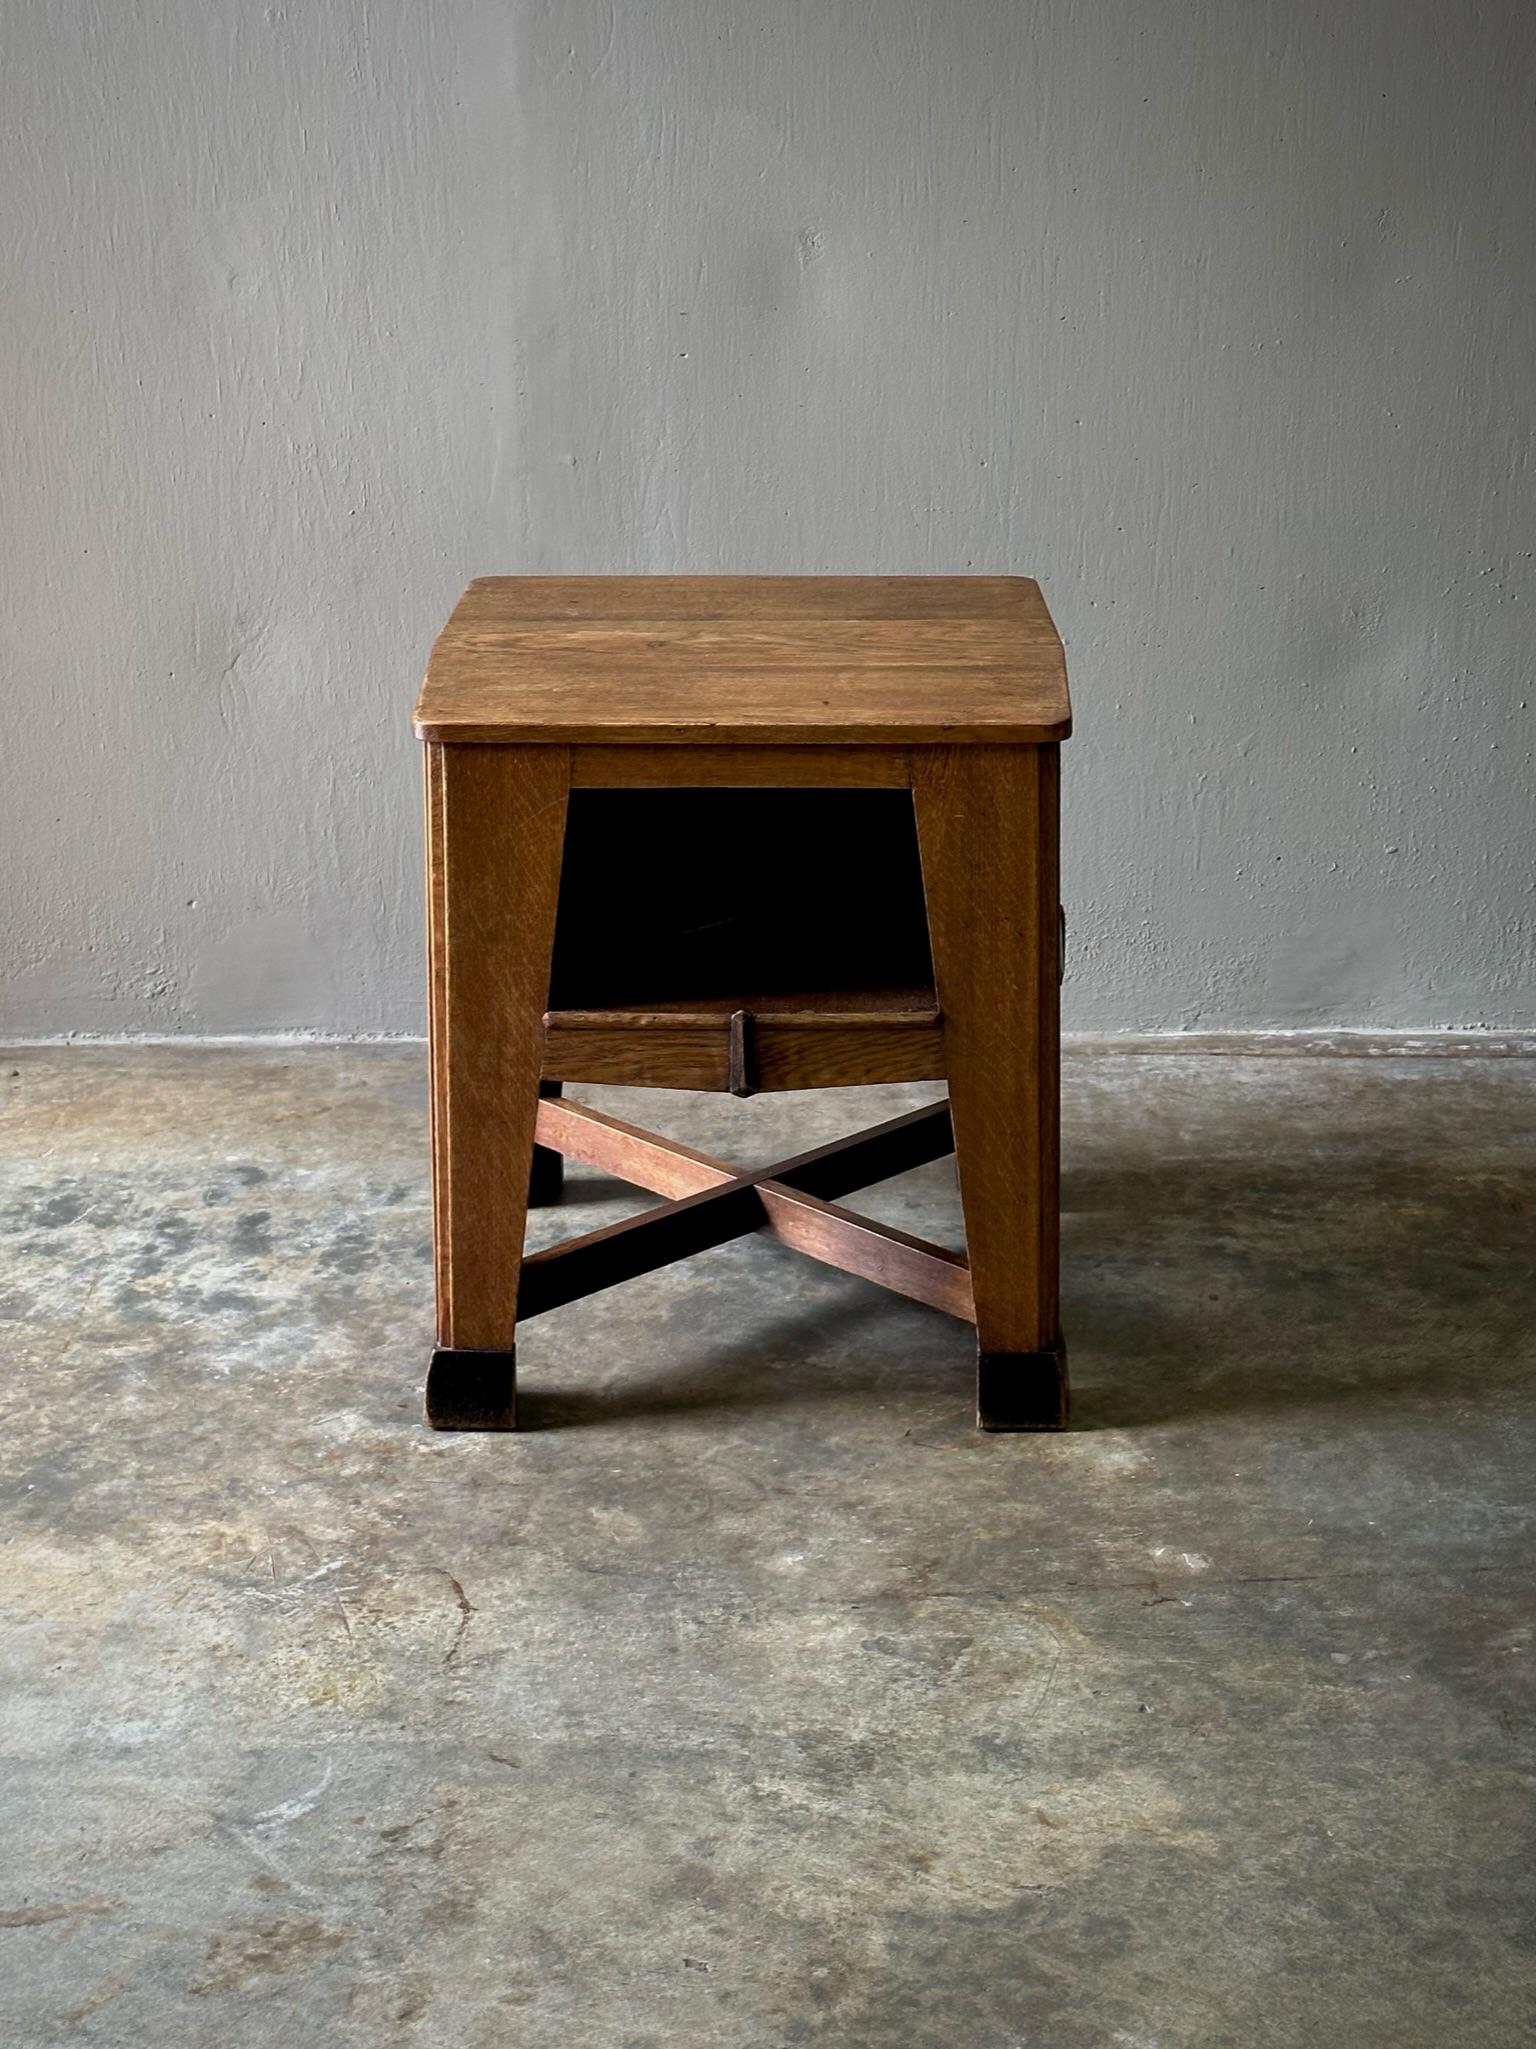 Dutch wood side table with square surface top, lower shelving units, and triangulated legs in the Amsterdam School style. The Amsterdamse School was known for its progressive, Bauhaus-adjacent ideology and combined elements of Art Nouveau and Art